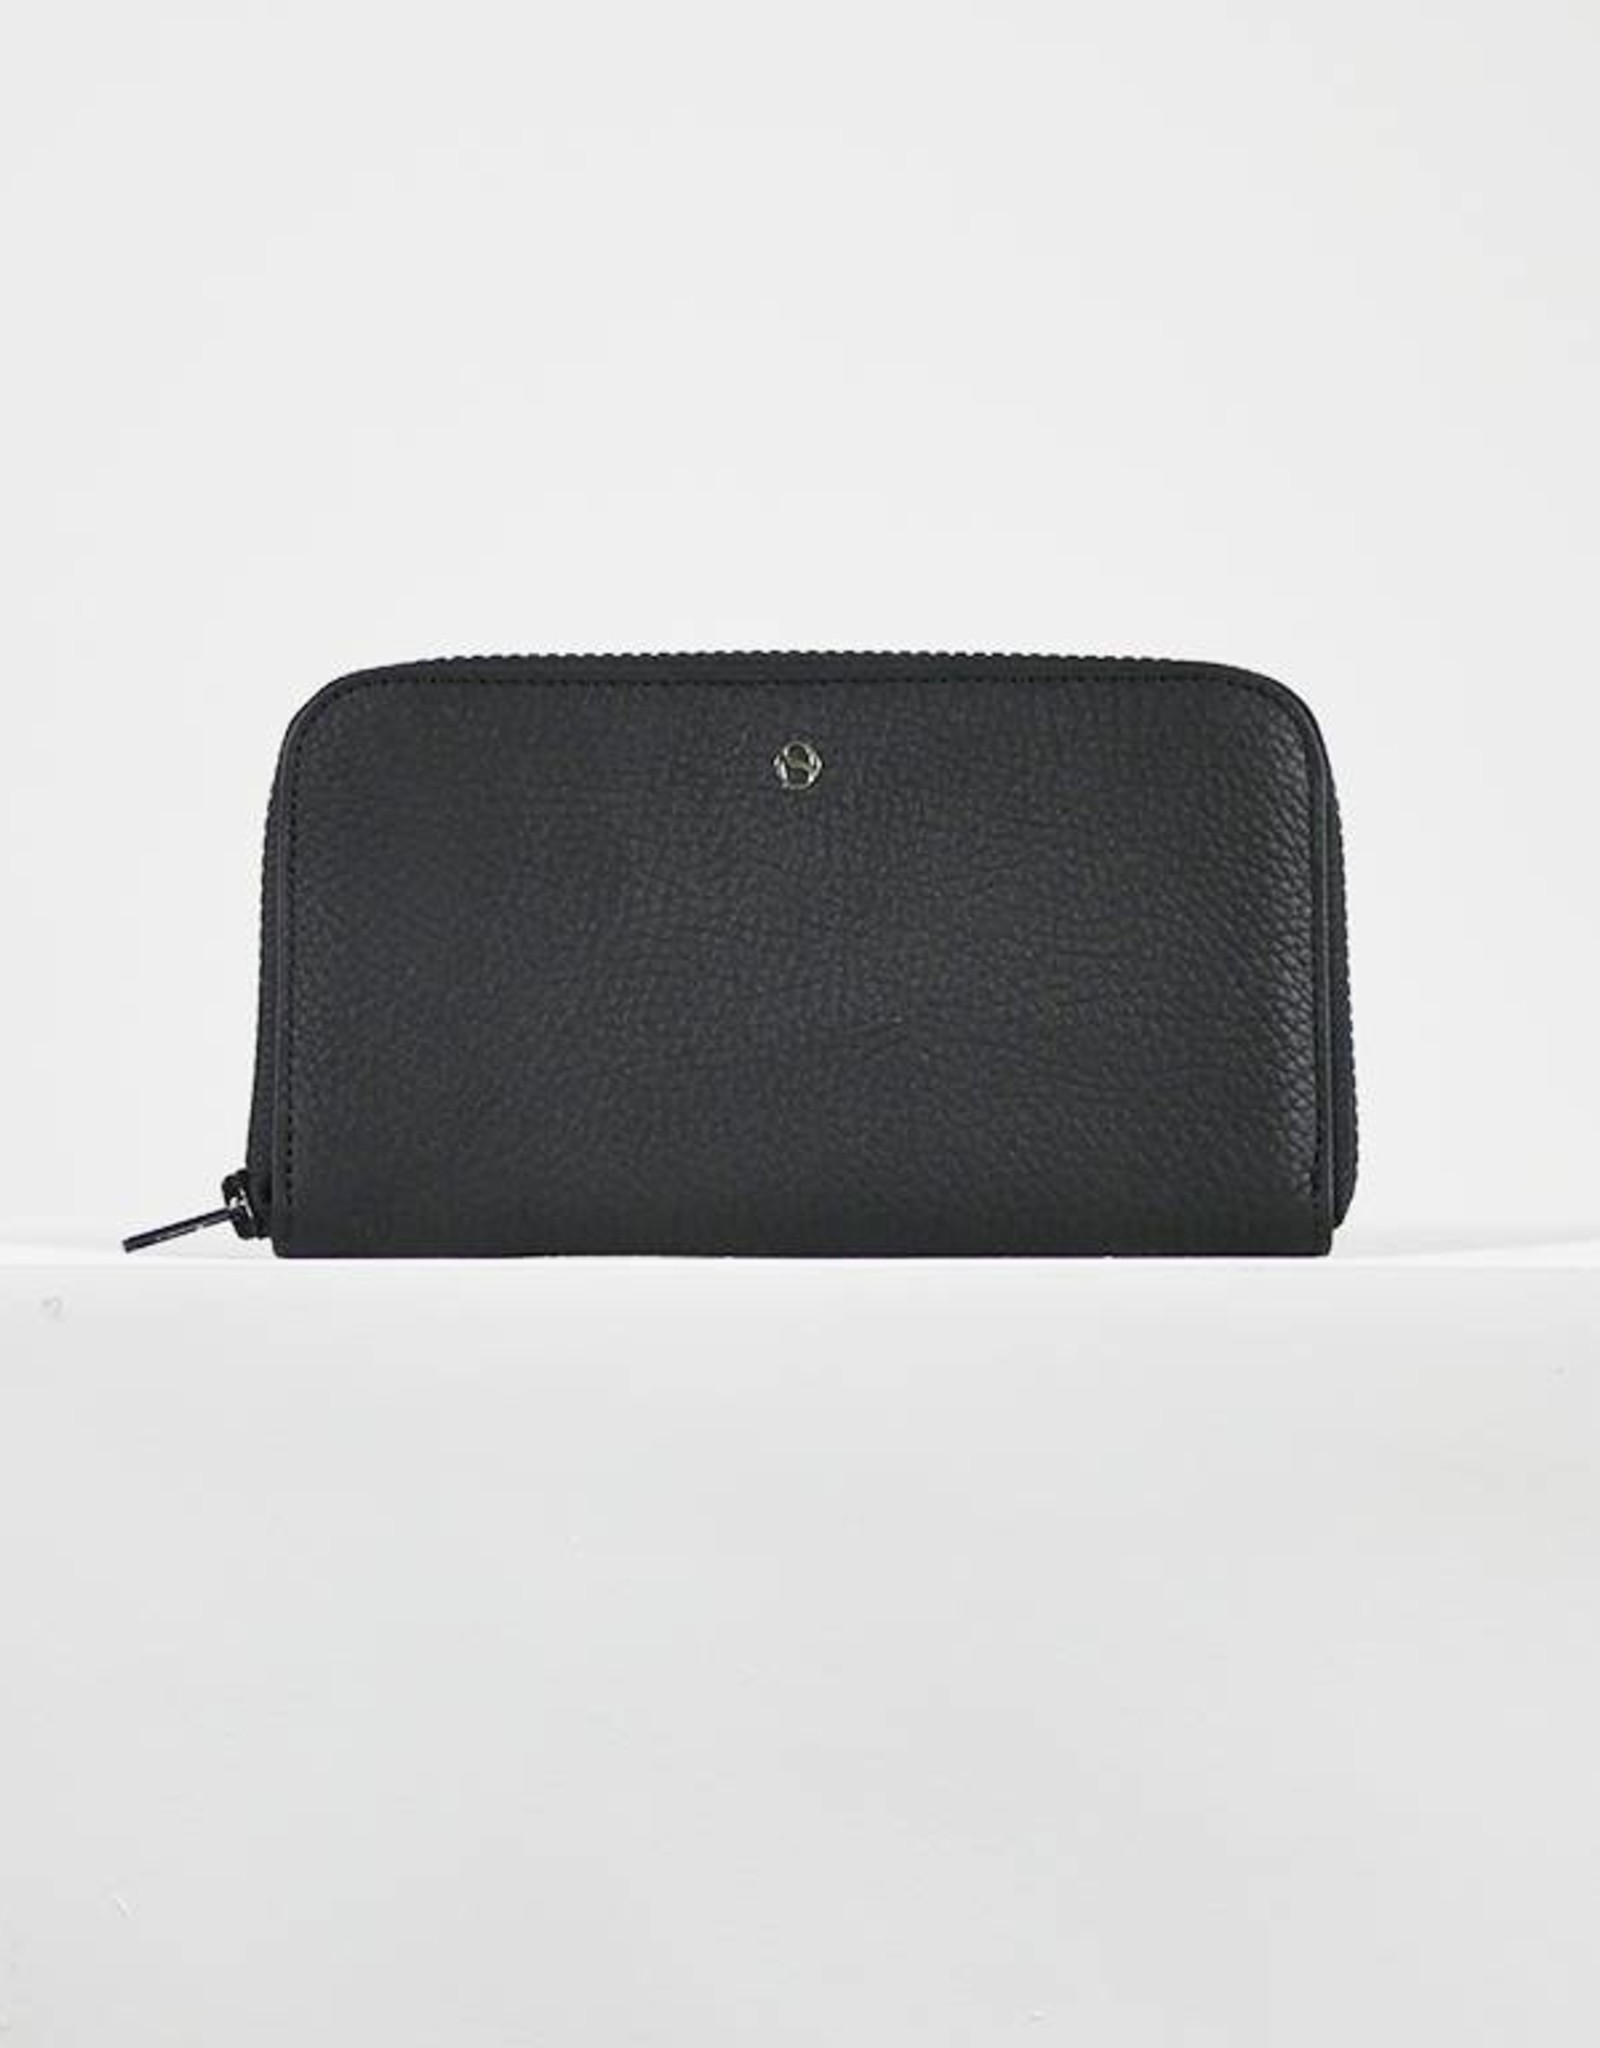 Large zipped leather wallet, Black. - Stories Official